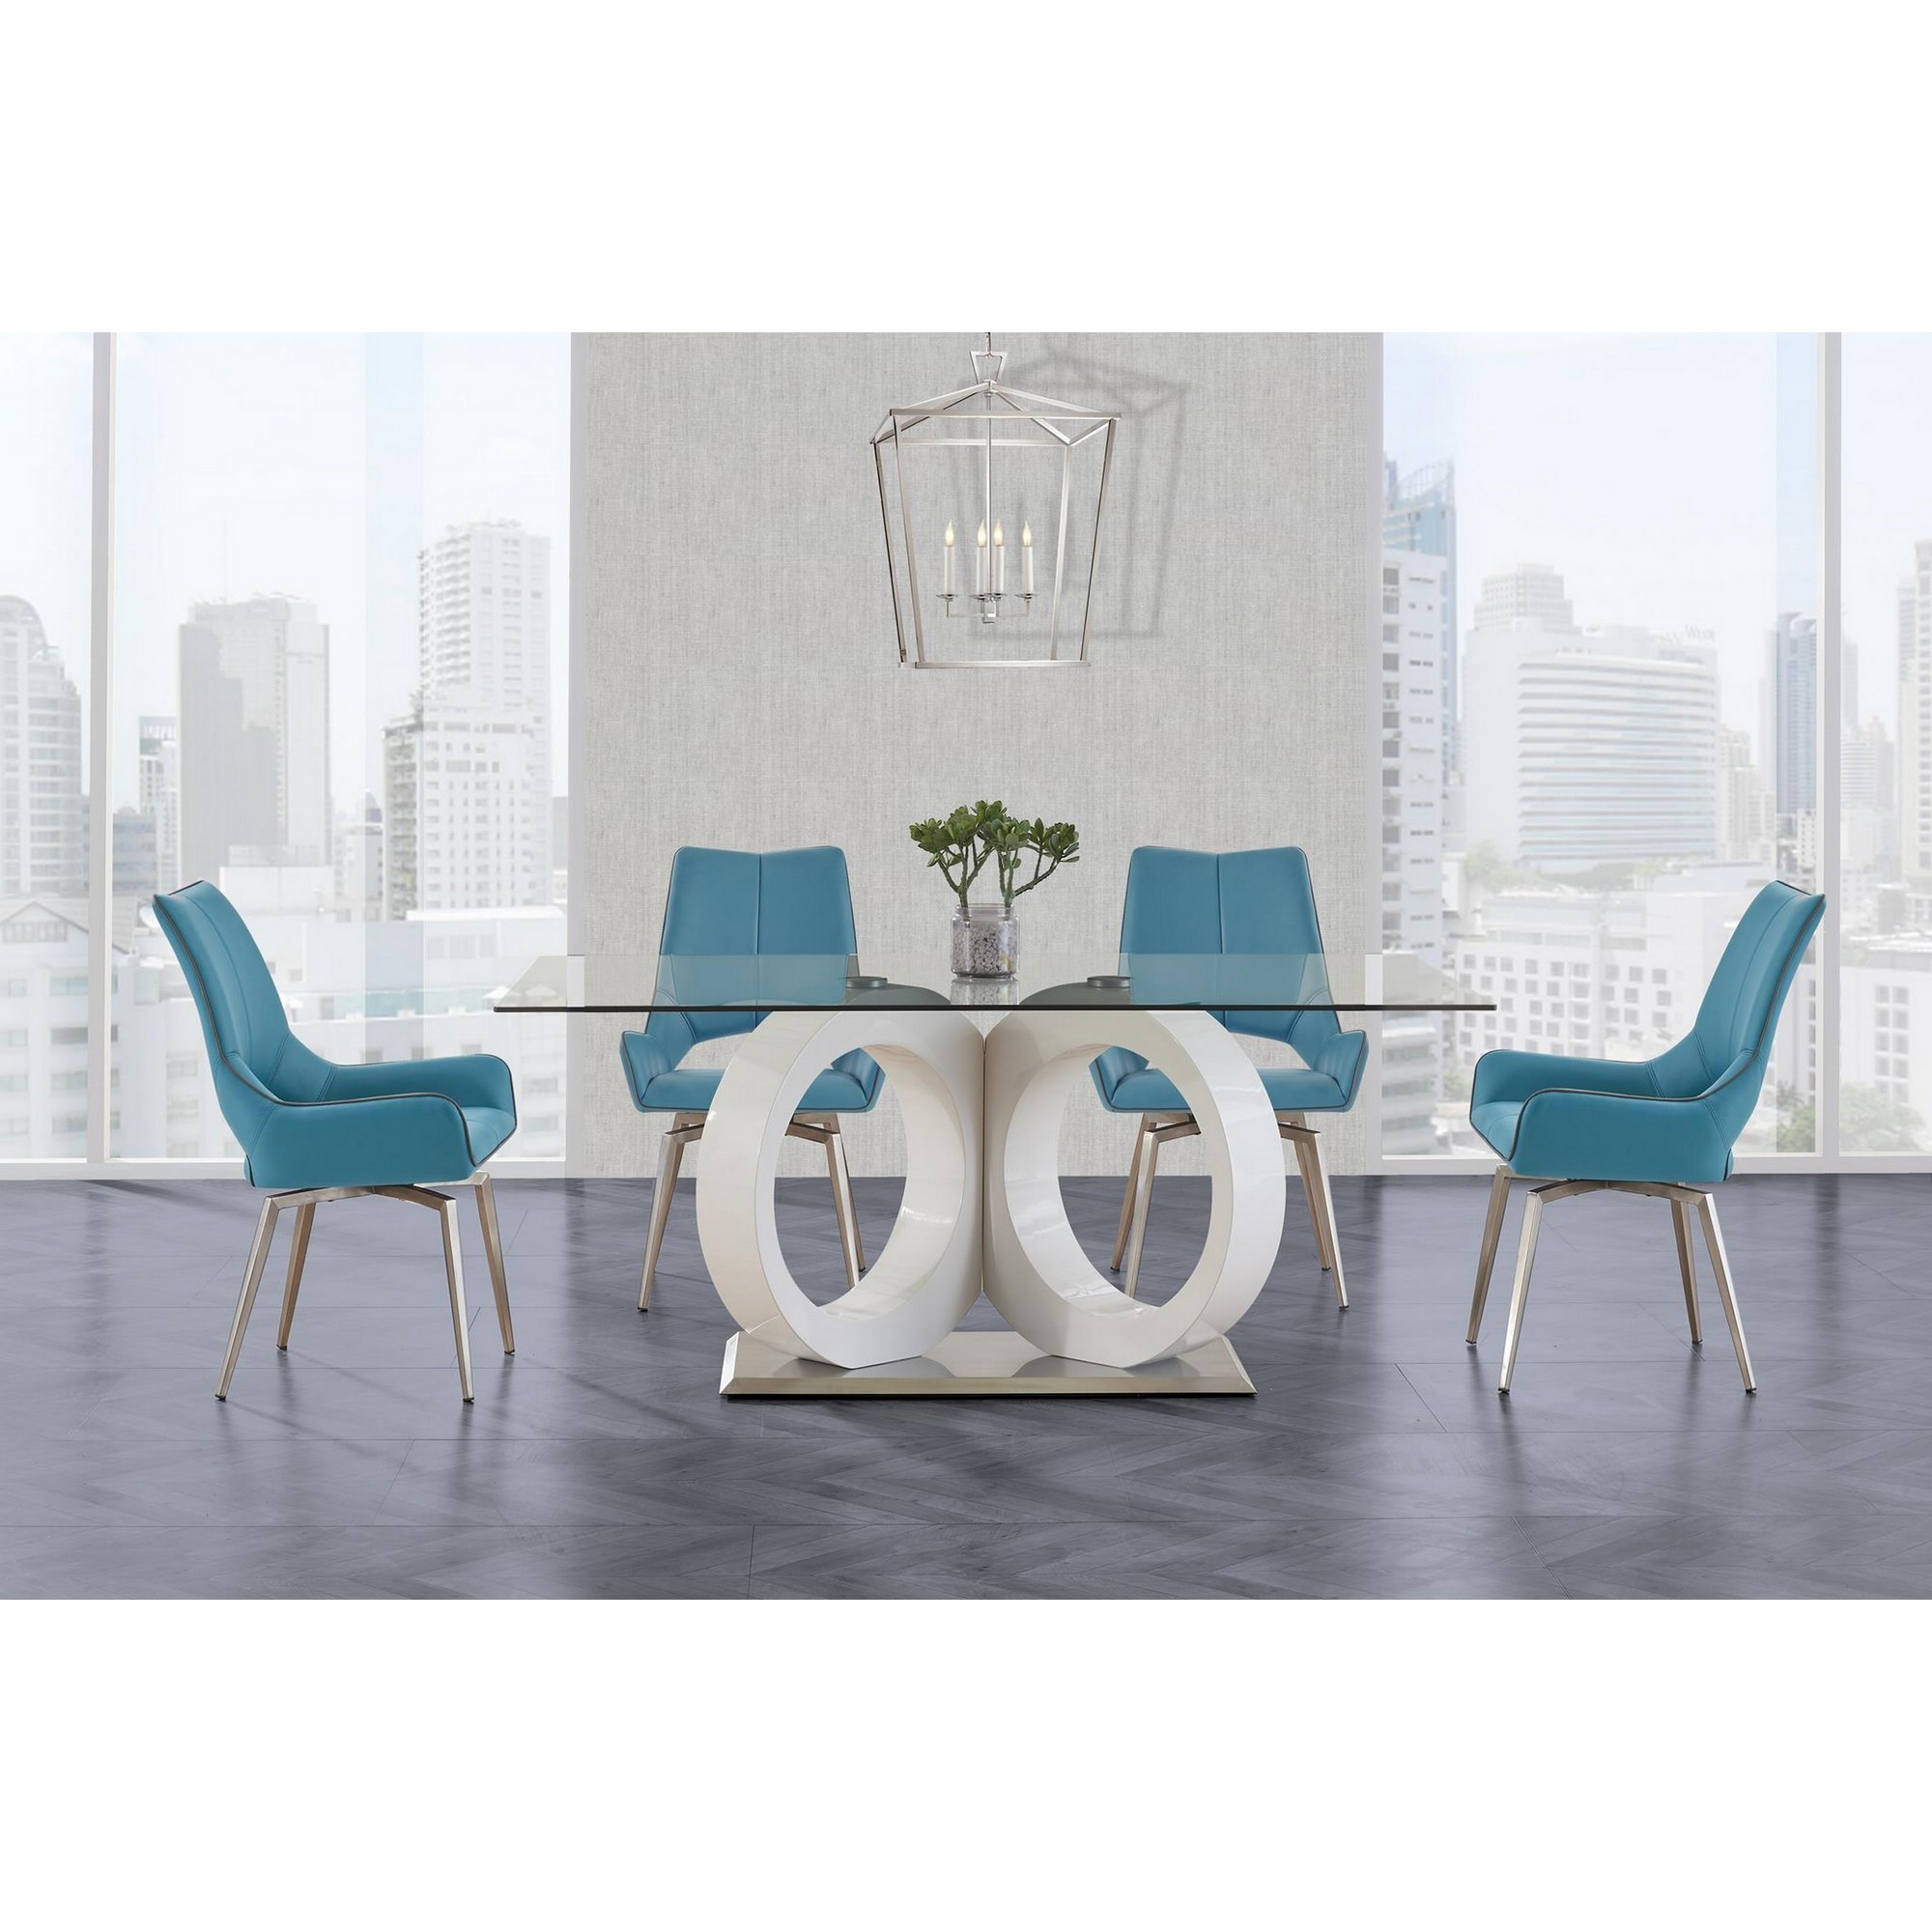 White tone Geometrical style base with Rectangular Glass top Dining Table